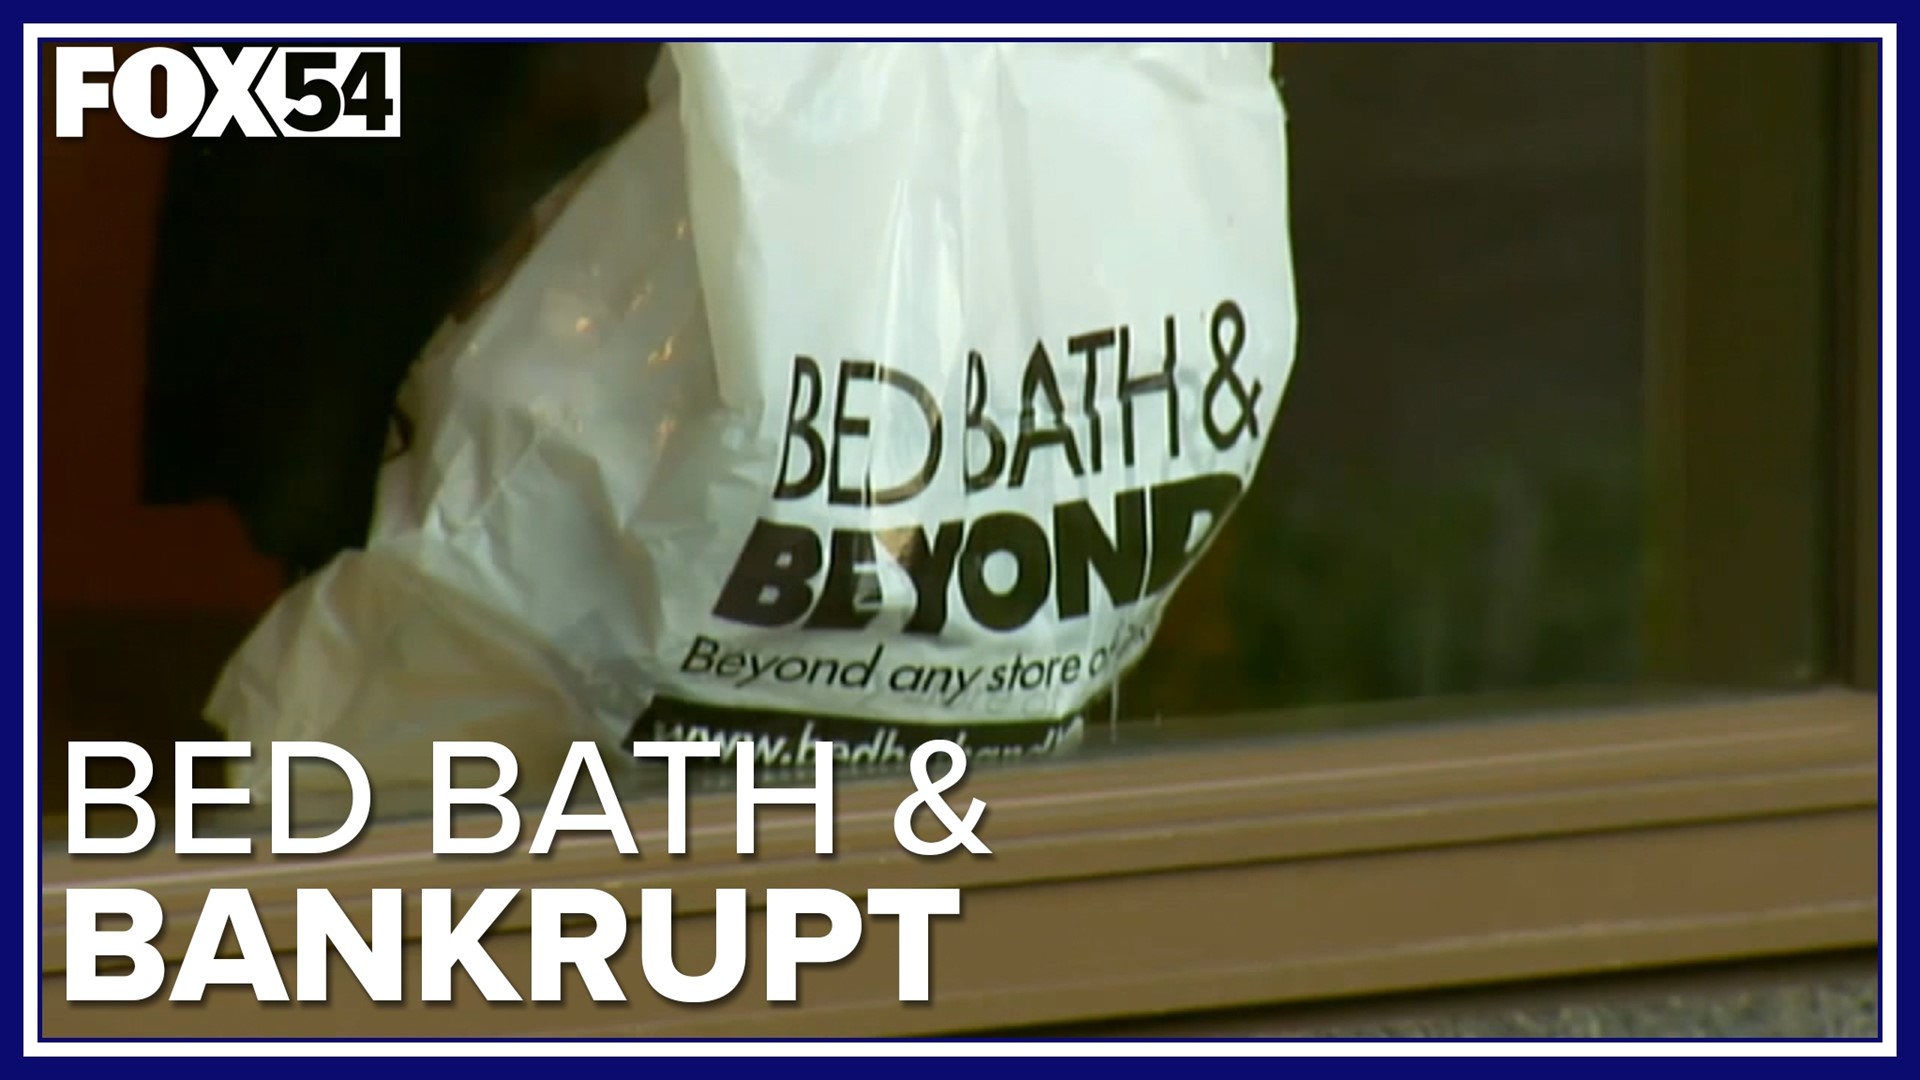 After once being a Fortune 500 company, the home goods retailer prepares to go out of business.